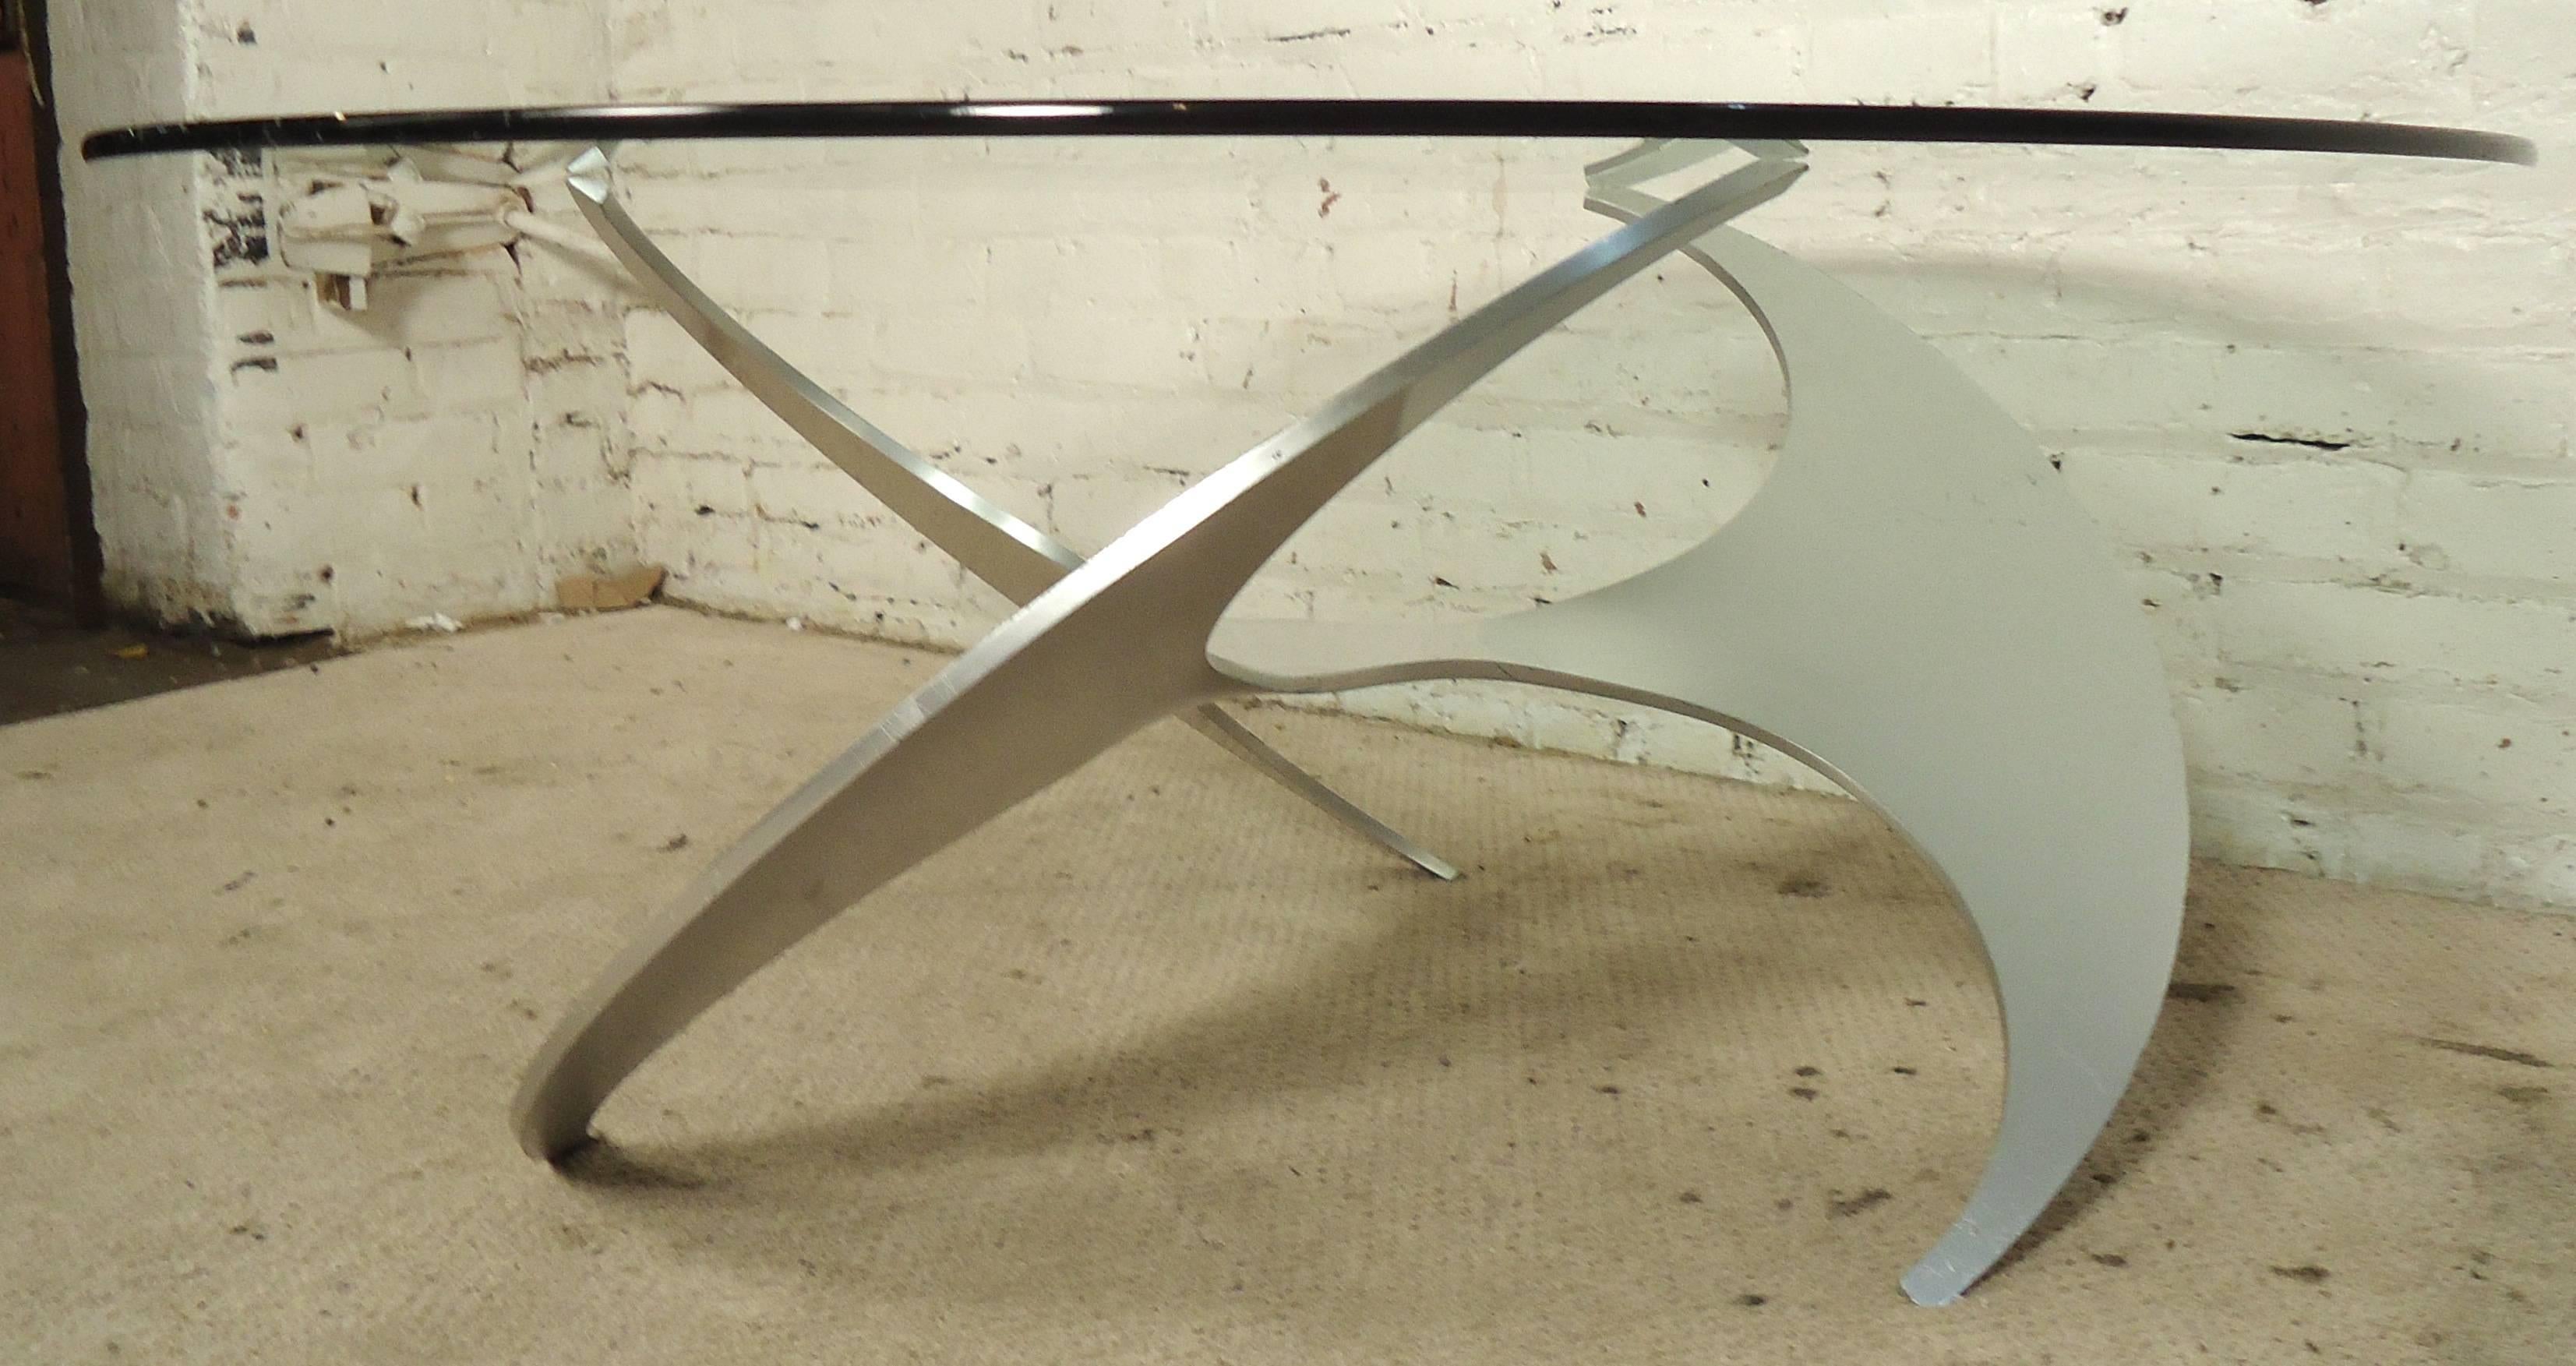 Vintage-modern coffee table with metal propeller base and 1/2 inch thick round glass top. Designed by Knut Hesterberg.

Please confirm item location NY or NJ with dealer.